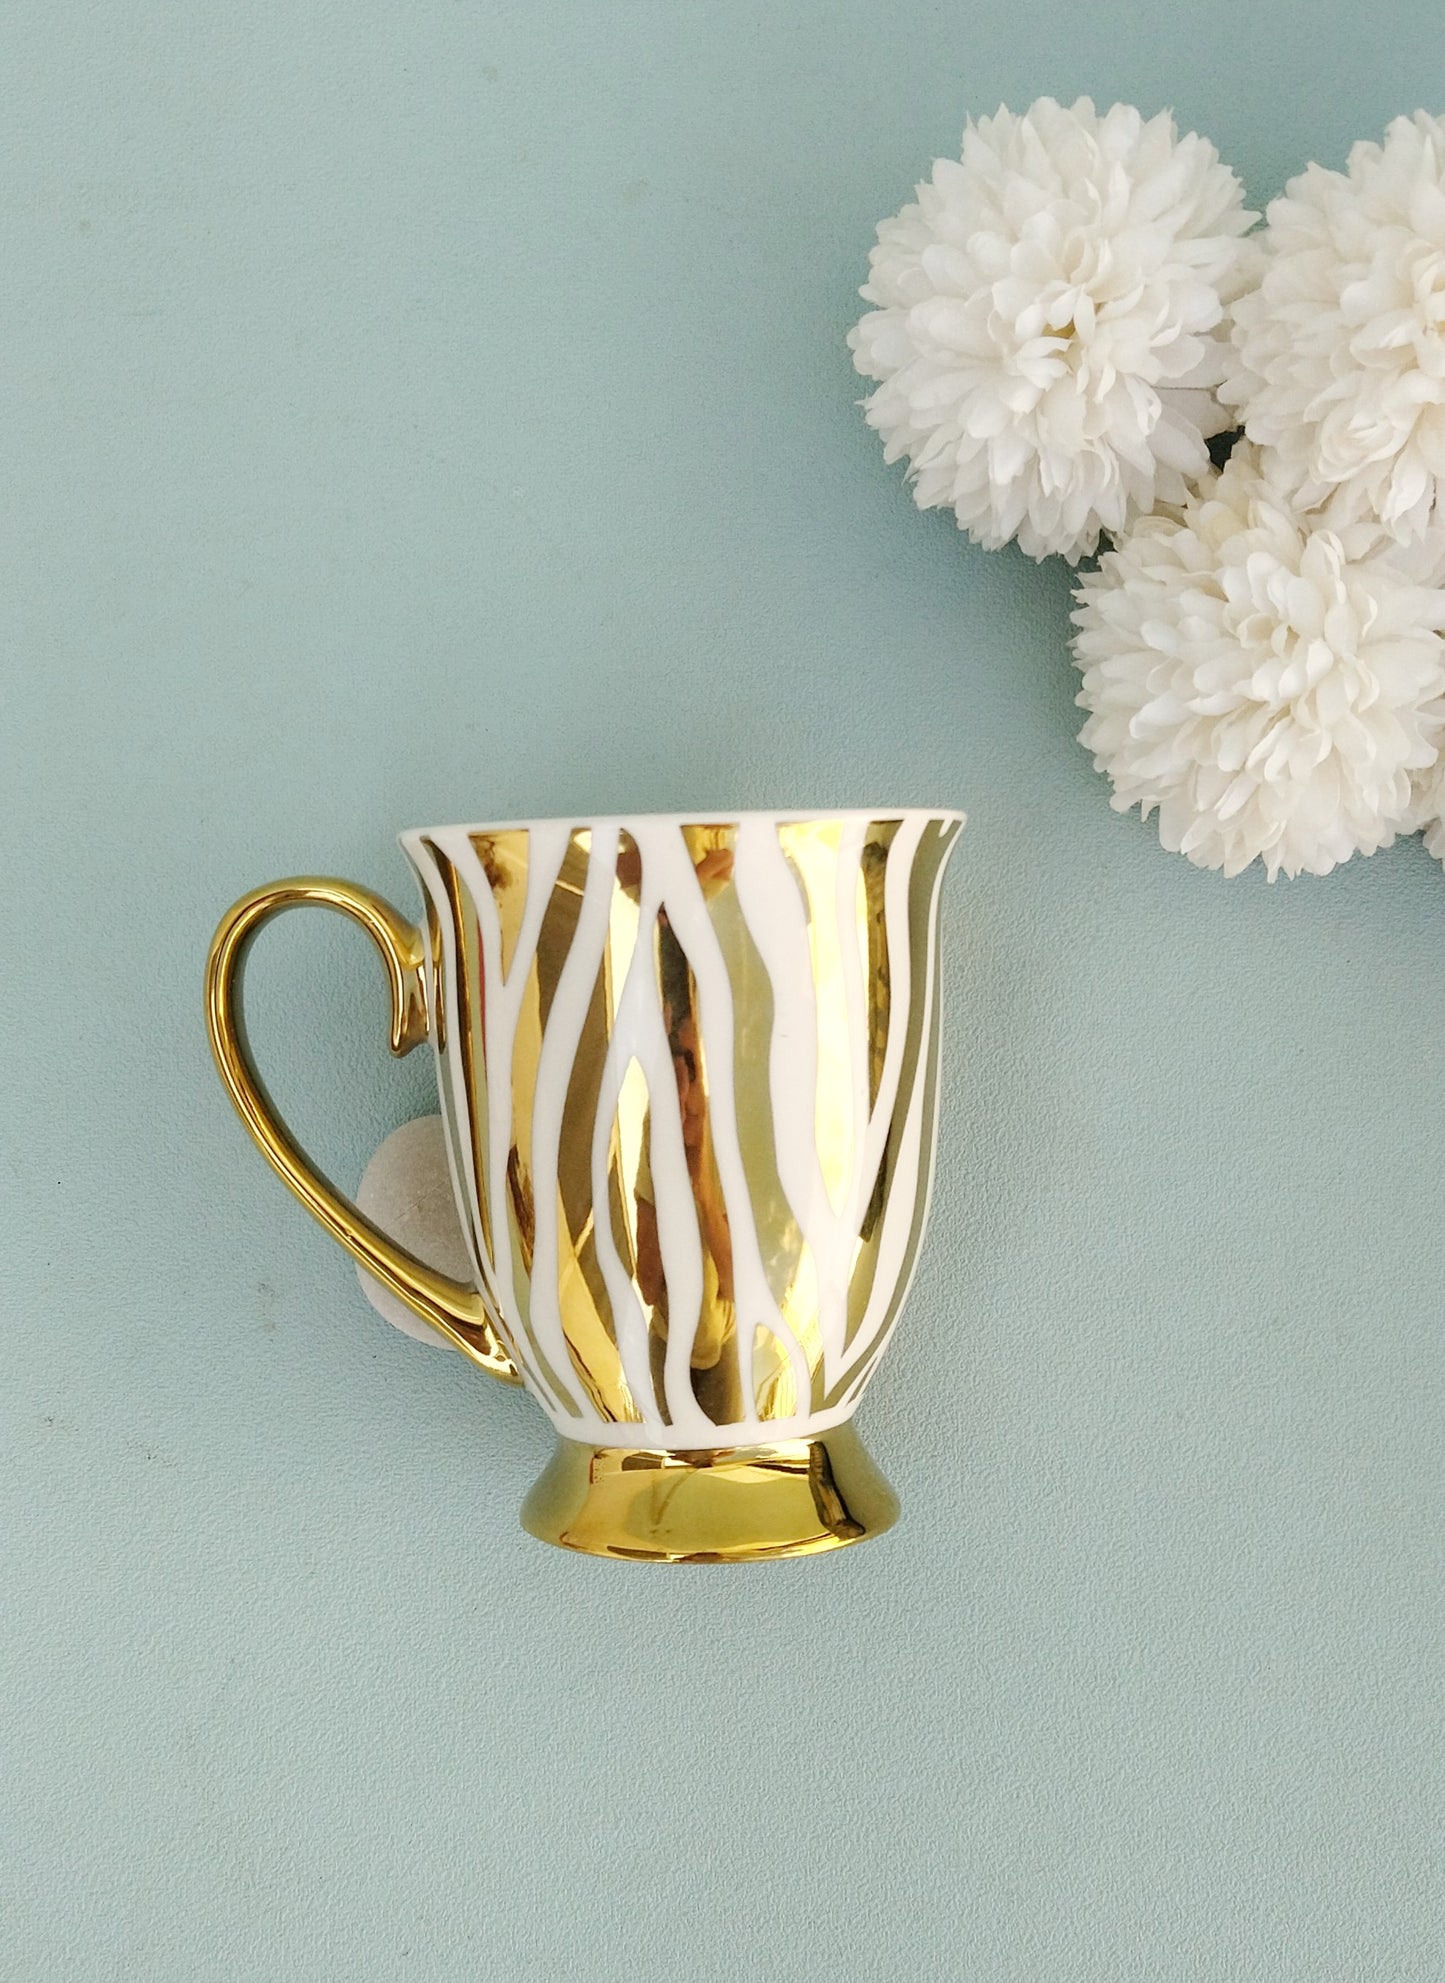 Tea Gift Box, White And Gold Ceramic Cup With Gold Spoon And Tea Infuser